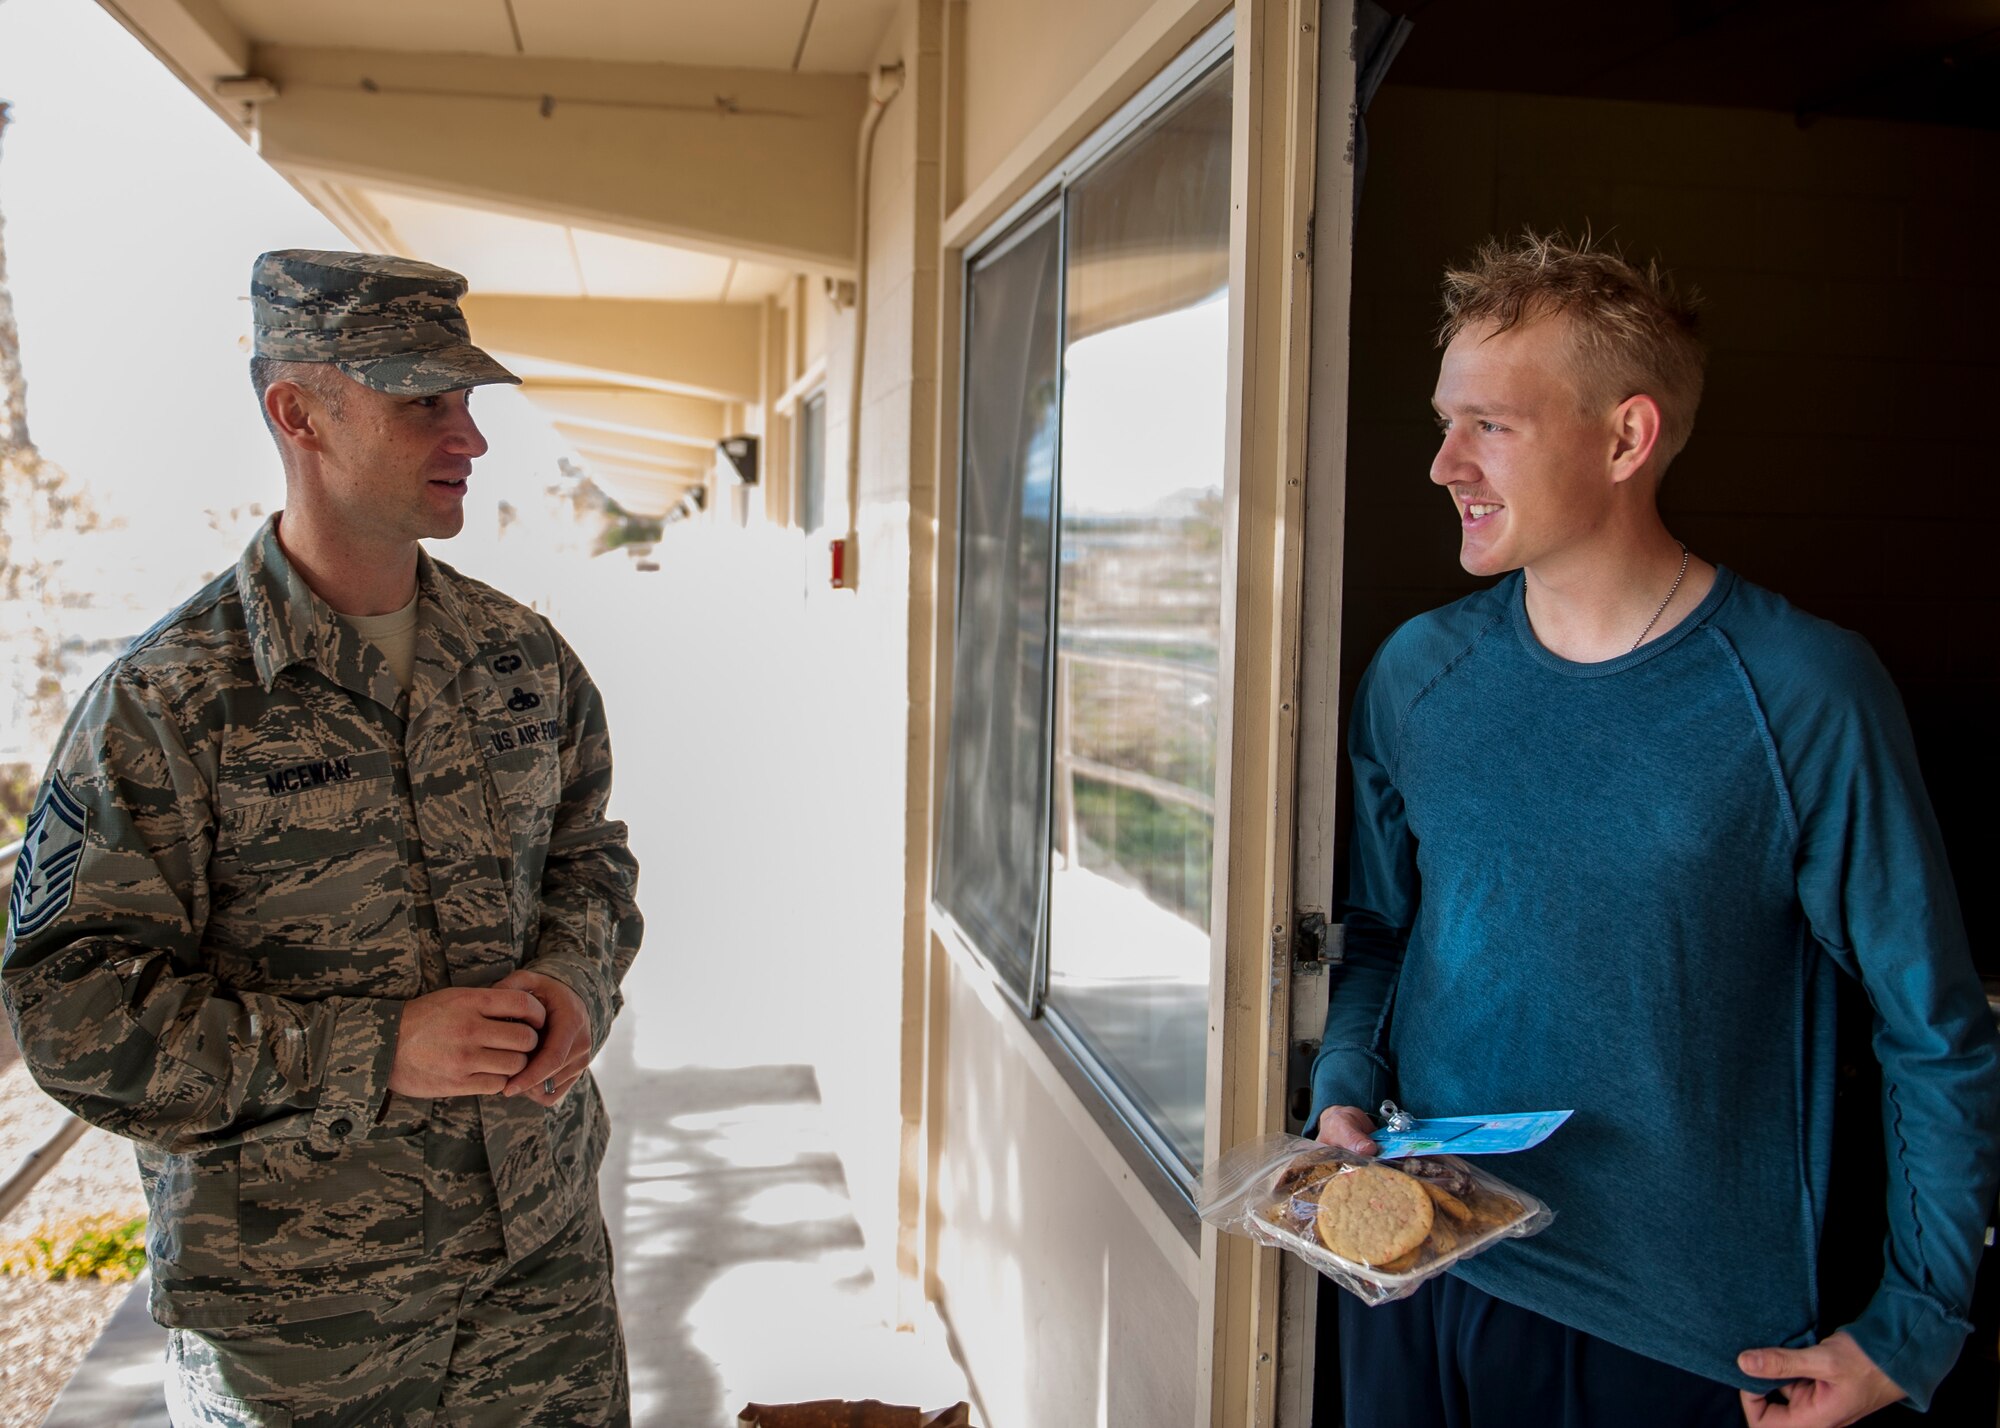 Airman 1st Class Hayden Woodcox, 99th Security Forces Squadron member, receives a cookie package from Senior Master Sgt. Christopher McEwan, 99th SFS first sergeant, during the Airman Cookie Drive at Nellis Air Force Base, Nev., Dec. 14, 2015. The cookie drive is held every year to show Airmen living in the Nellis AFB dormitories they are not forgotten during the holiday season. (U.S. Air Force photo by Staff Sgt. Siuta B. Ika)